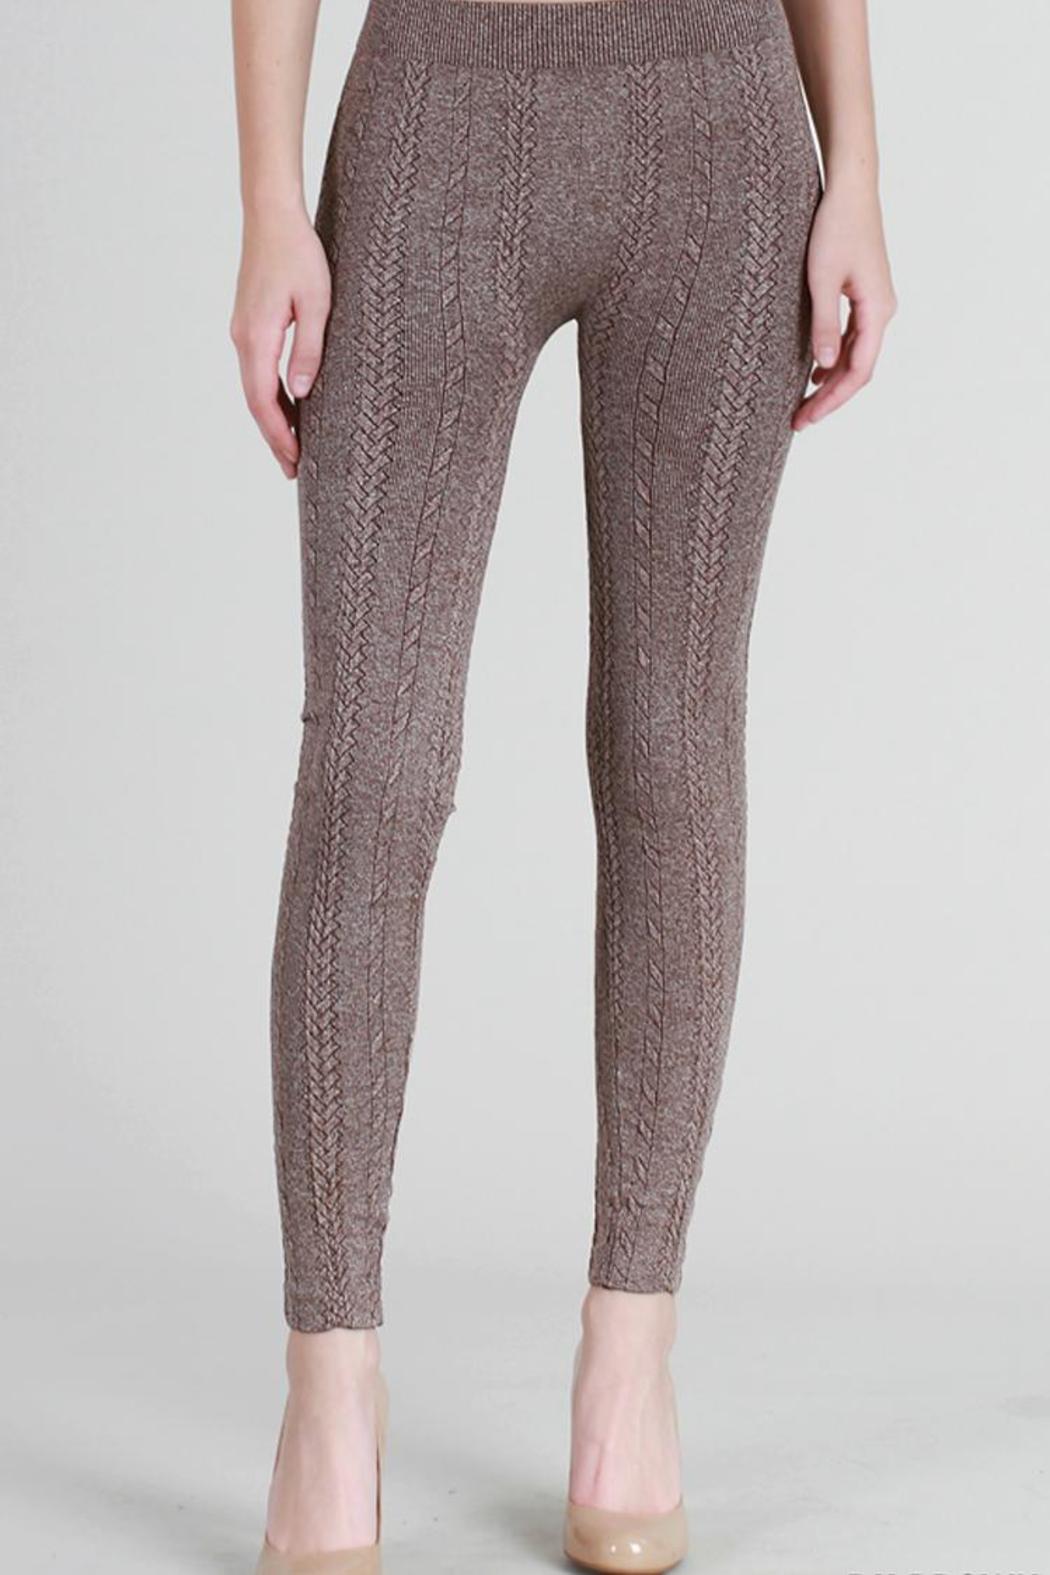 Cable knit leggings – Gift from winters